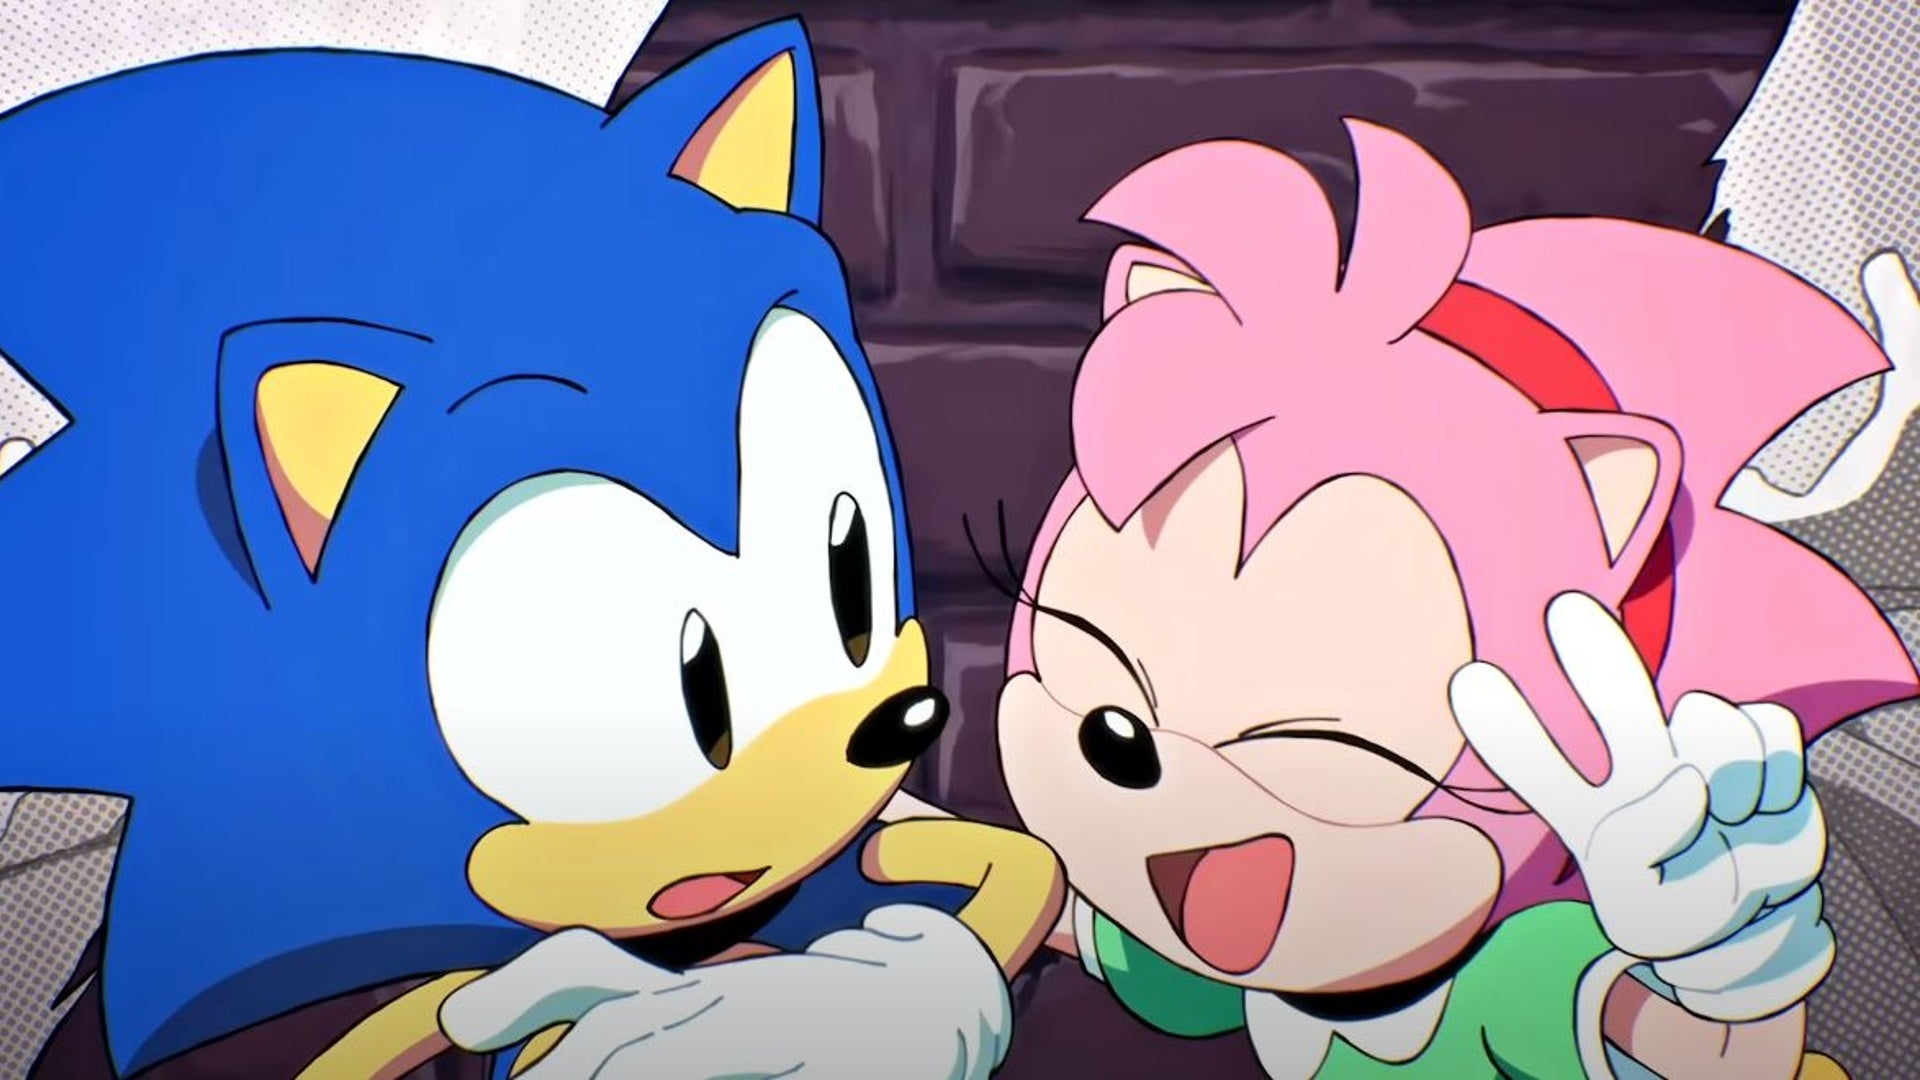 Sega are delisting the classic Sonic games included in the Sonic Origins collection